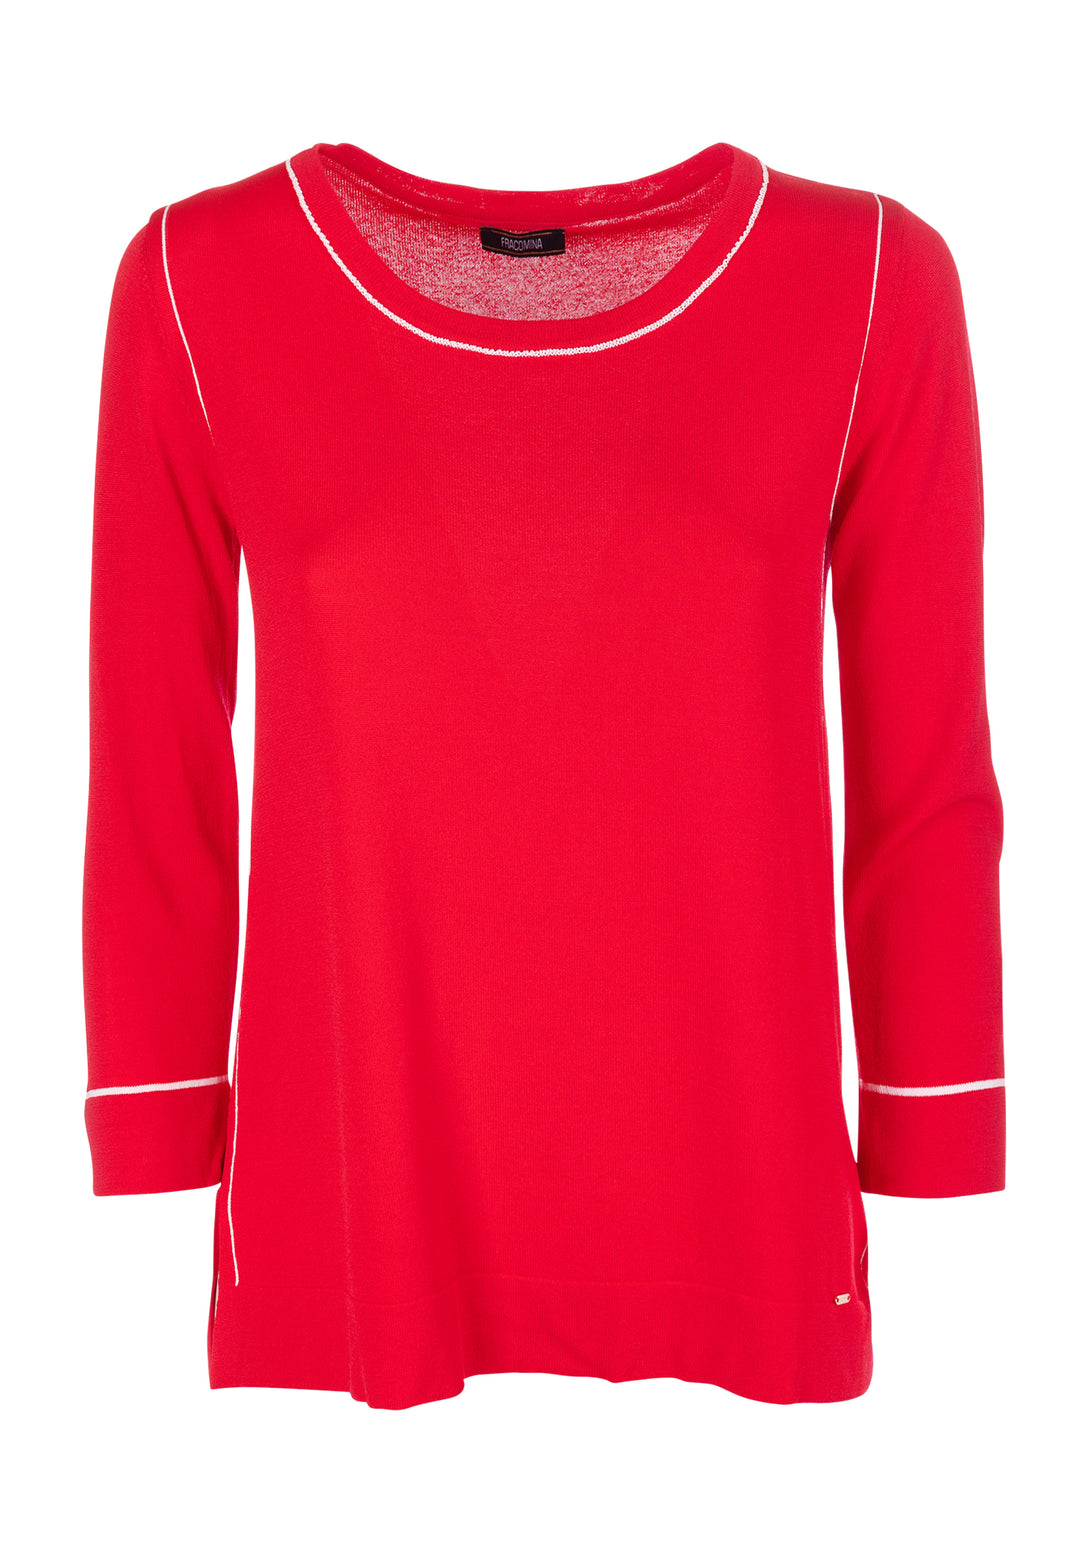 Knitwear regular fit with round neck